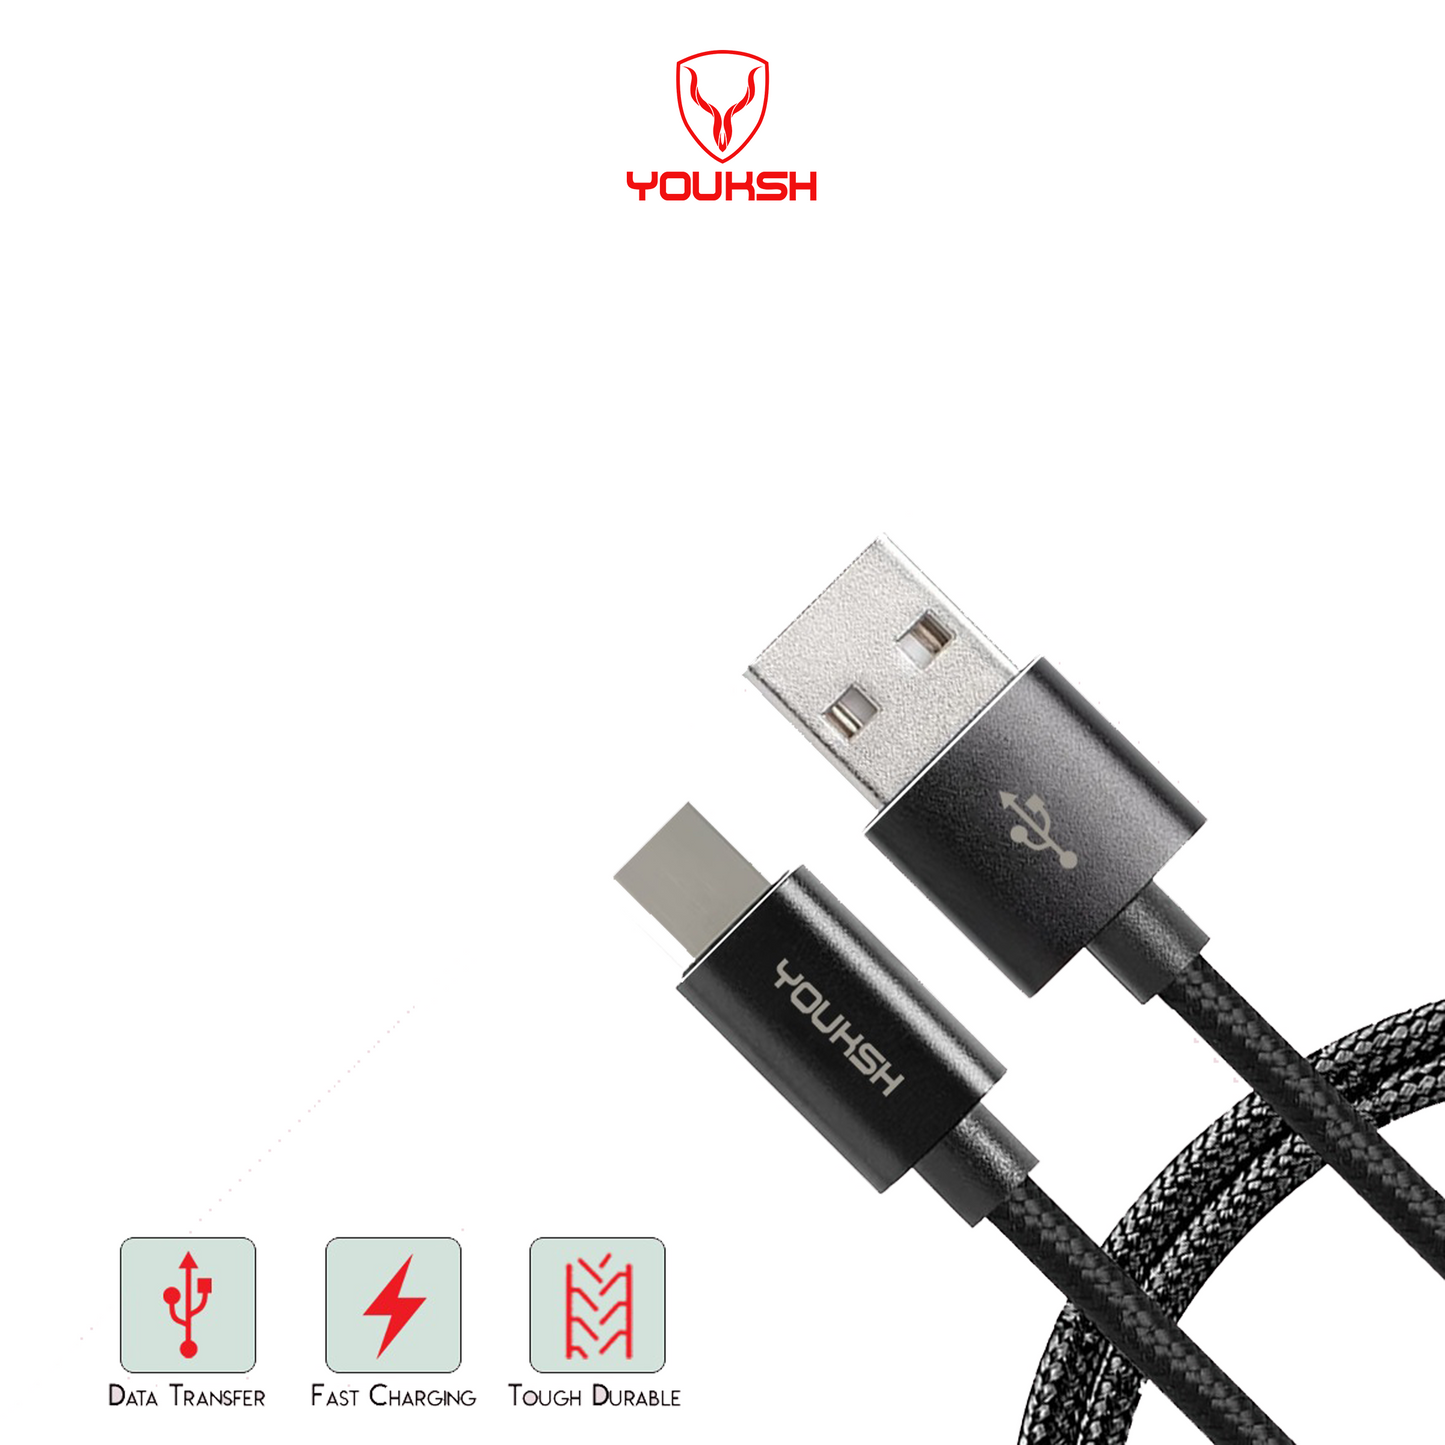 YOUKSH Mark-C Android Mobile Phones Data Cable - Fast Transmission - High Quailty - 1(Meter) - Non Breakable Data Cable - Android.